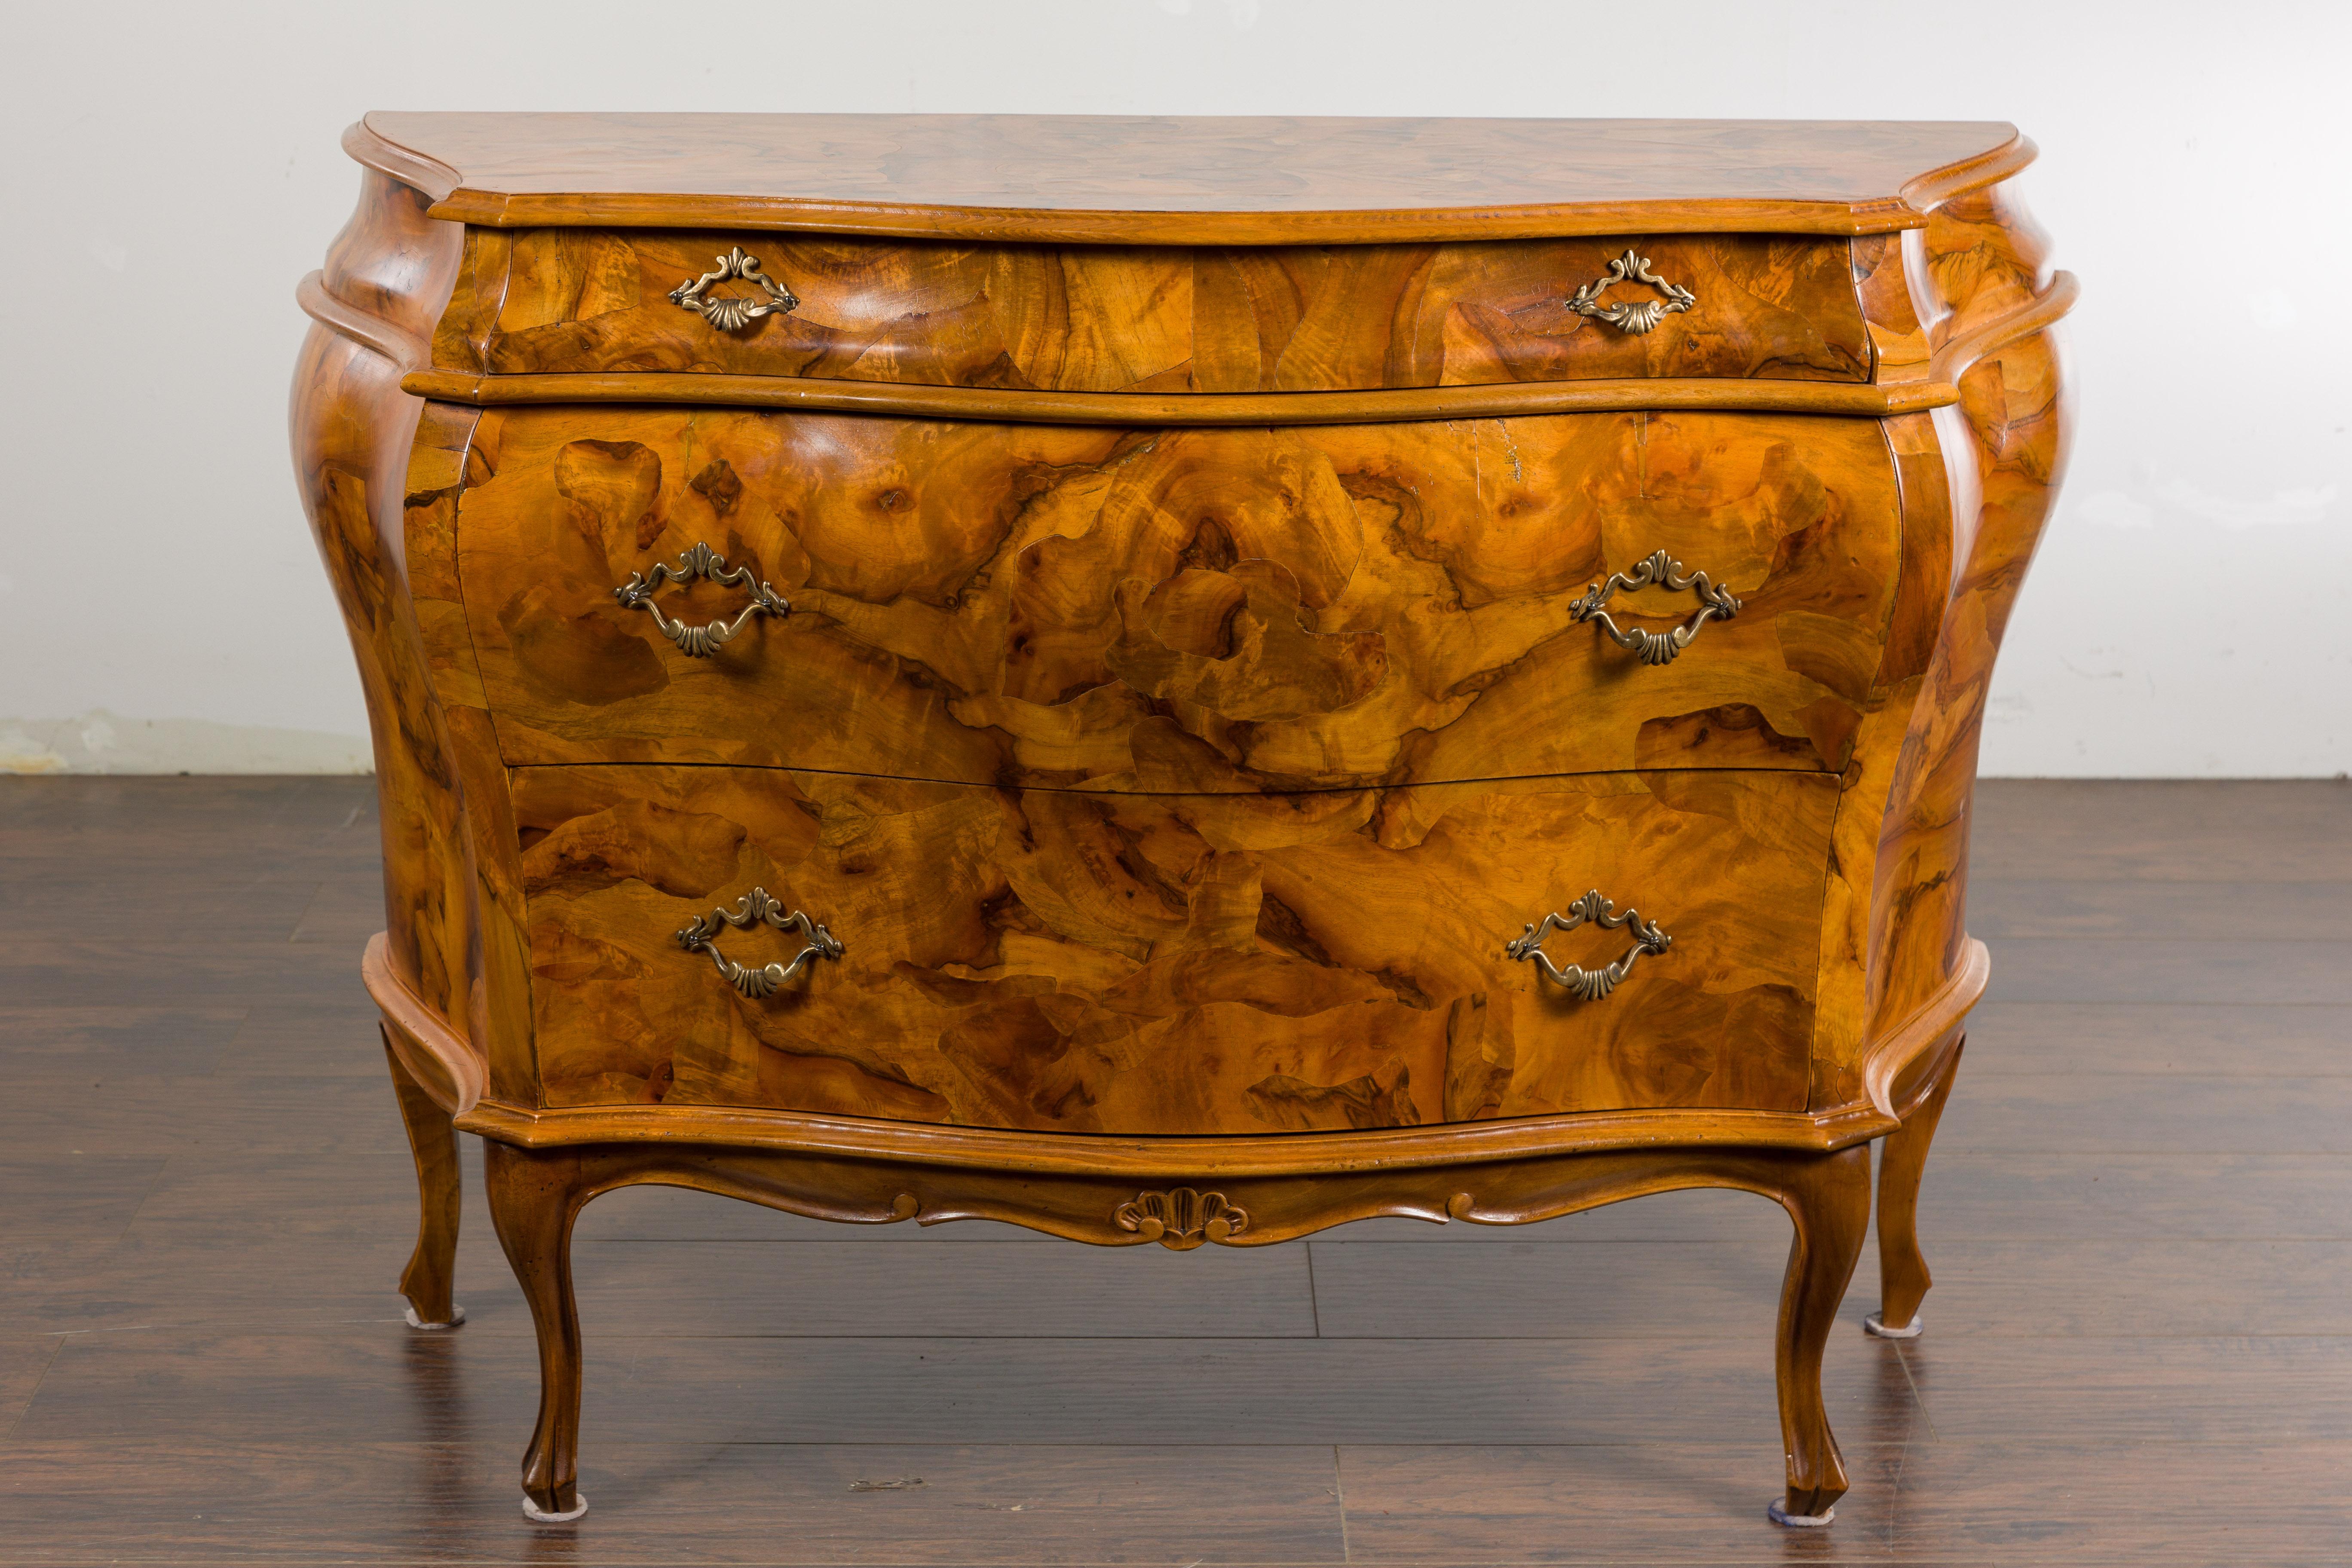 Italian Midcentury Rococo Style Bombé Chest with Three Drawers and Cabriole Legs For Sale 3